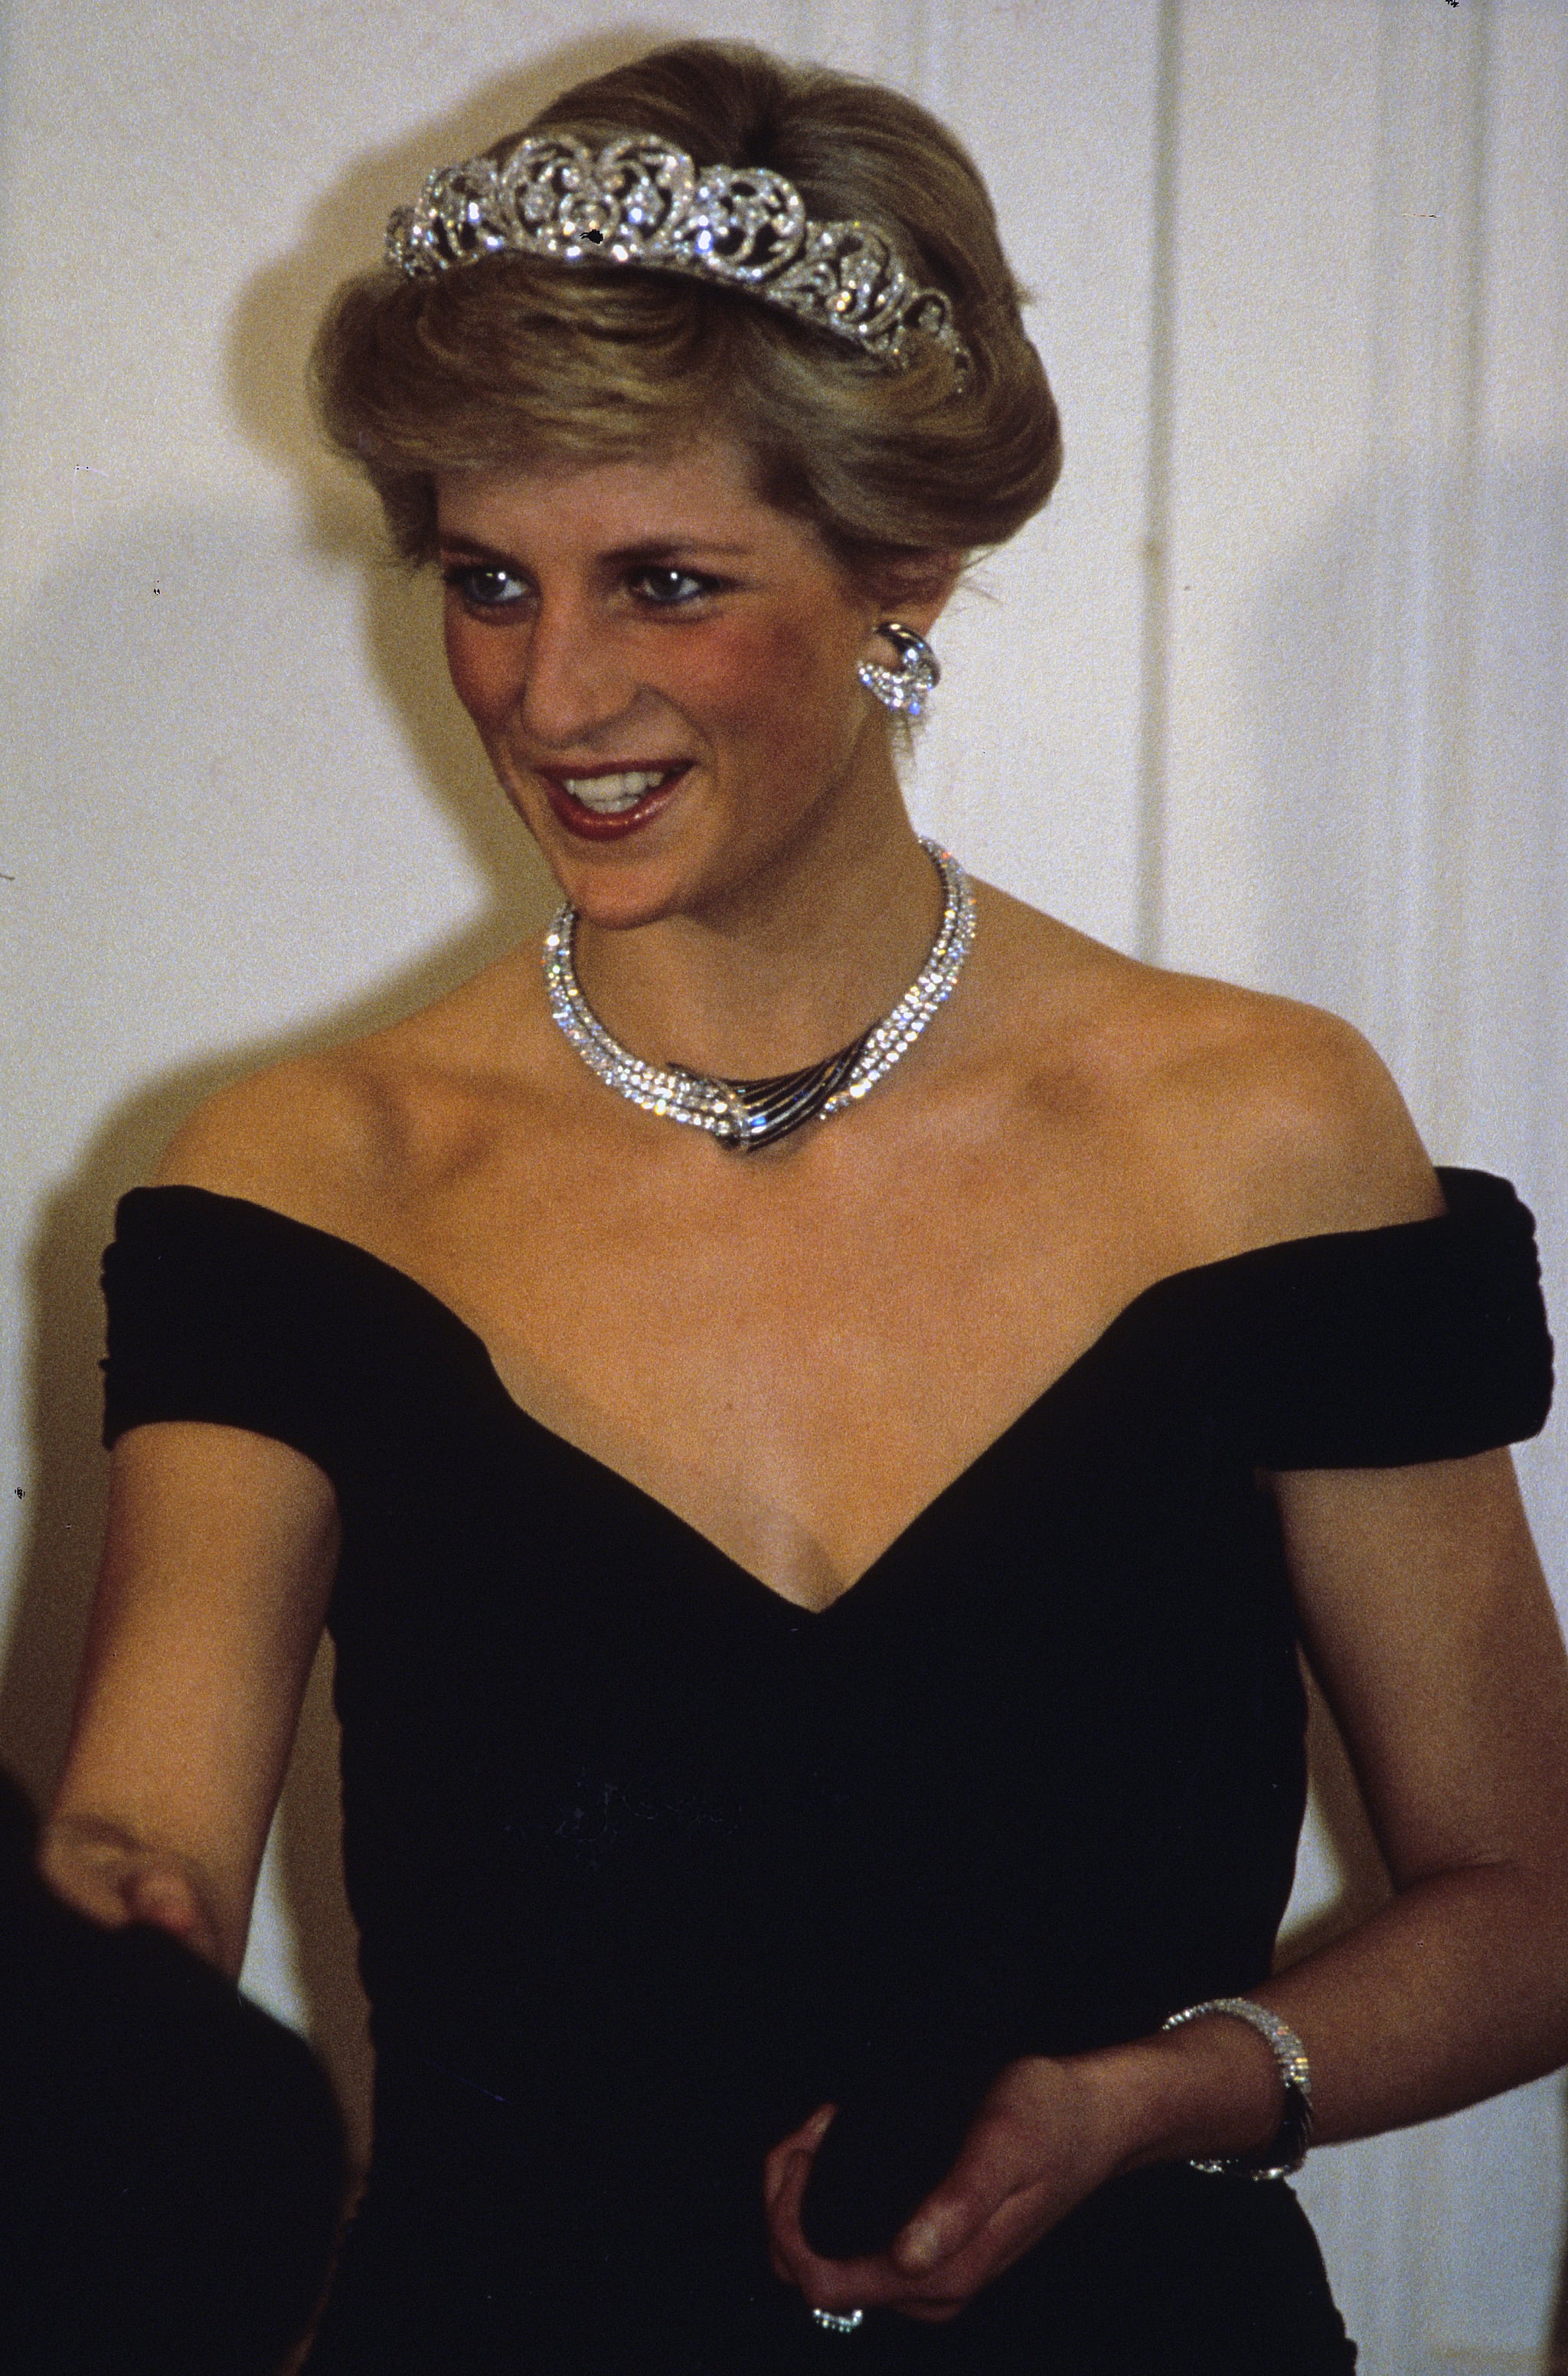 BONN, GERMANY - NOVEMBER 02:  Diana, Princess of Wales, wearing the Spencer family tiara and crescent shaped diamond and sapphire earring, necklace and bracelet given to her by the Sultan of Oman and a dress designed by Victor Edelstein, attends a banquet on November 02, 1987 in Bonn, Germany (Photo by Anwar Hussein/Getty Images)